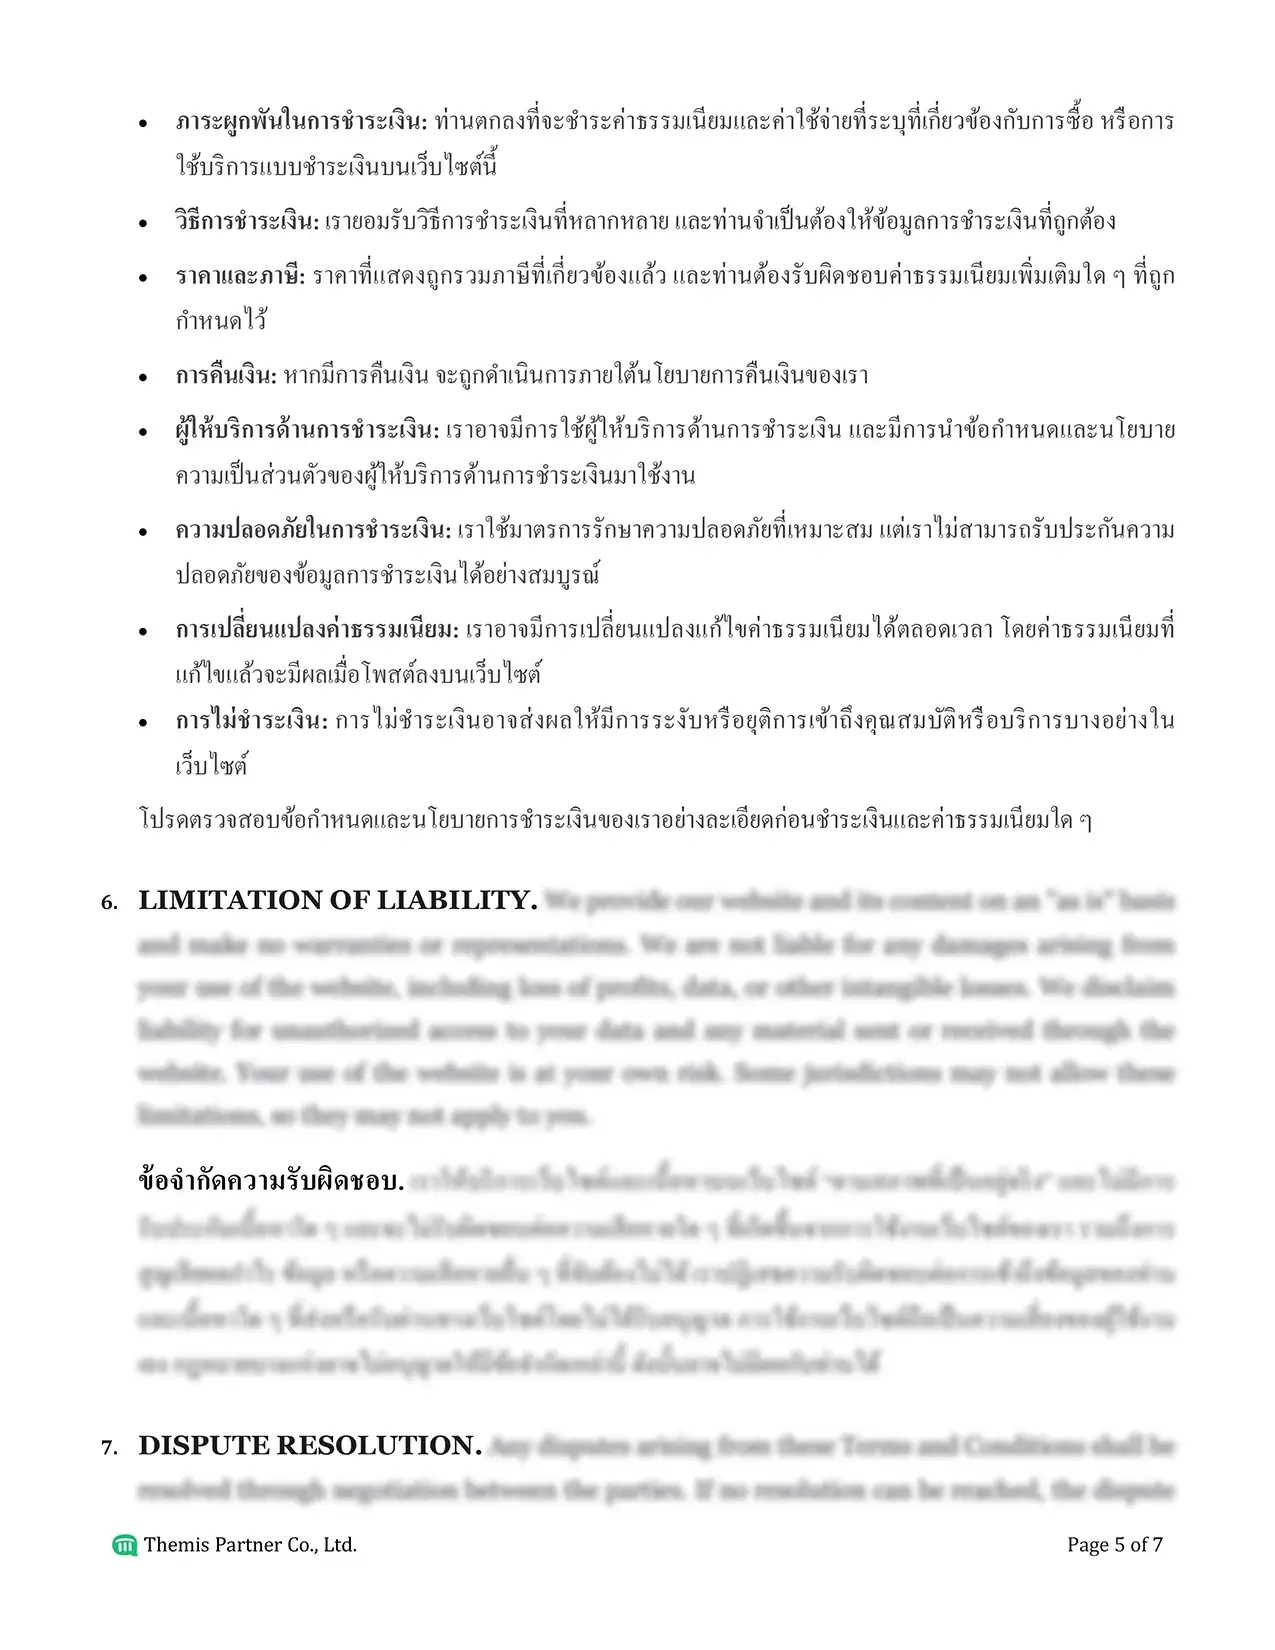 Terms and conditions Thailand 5